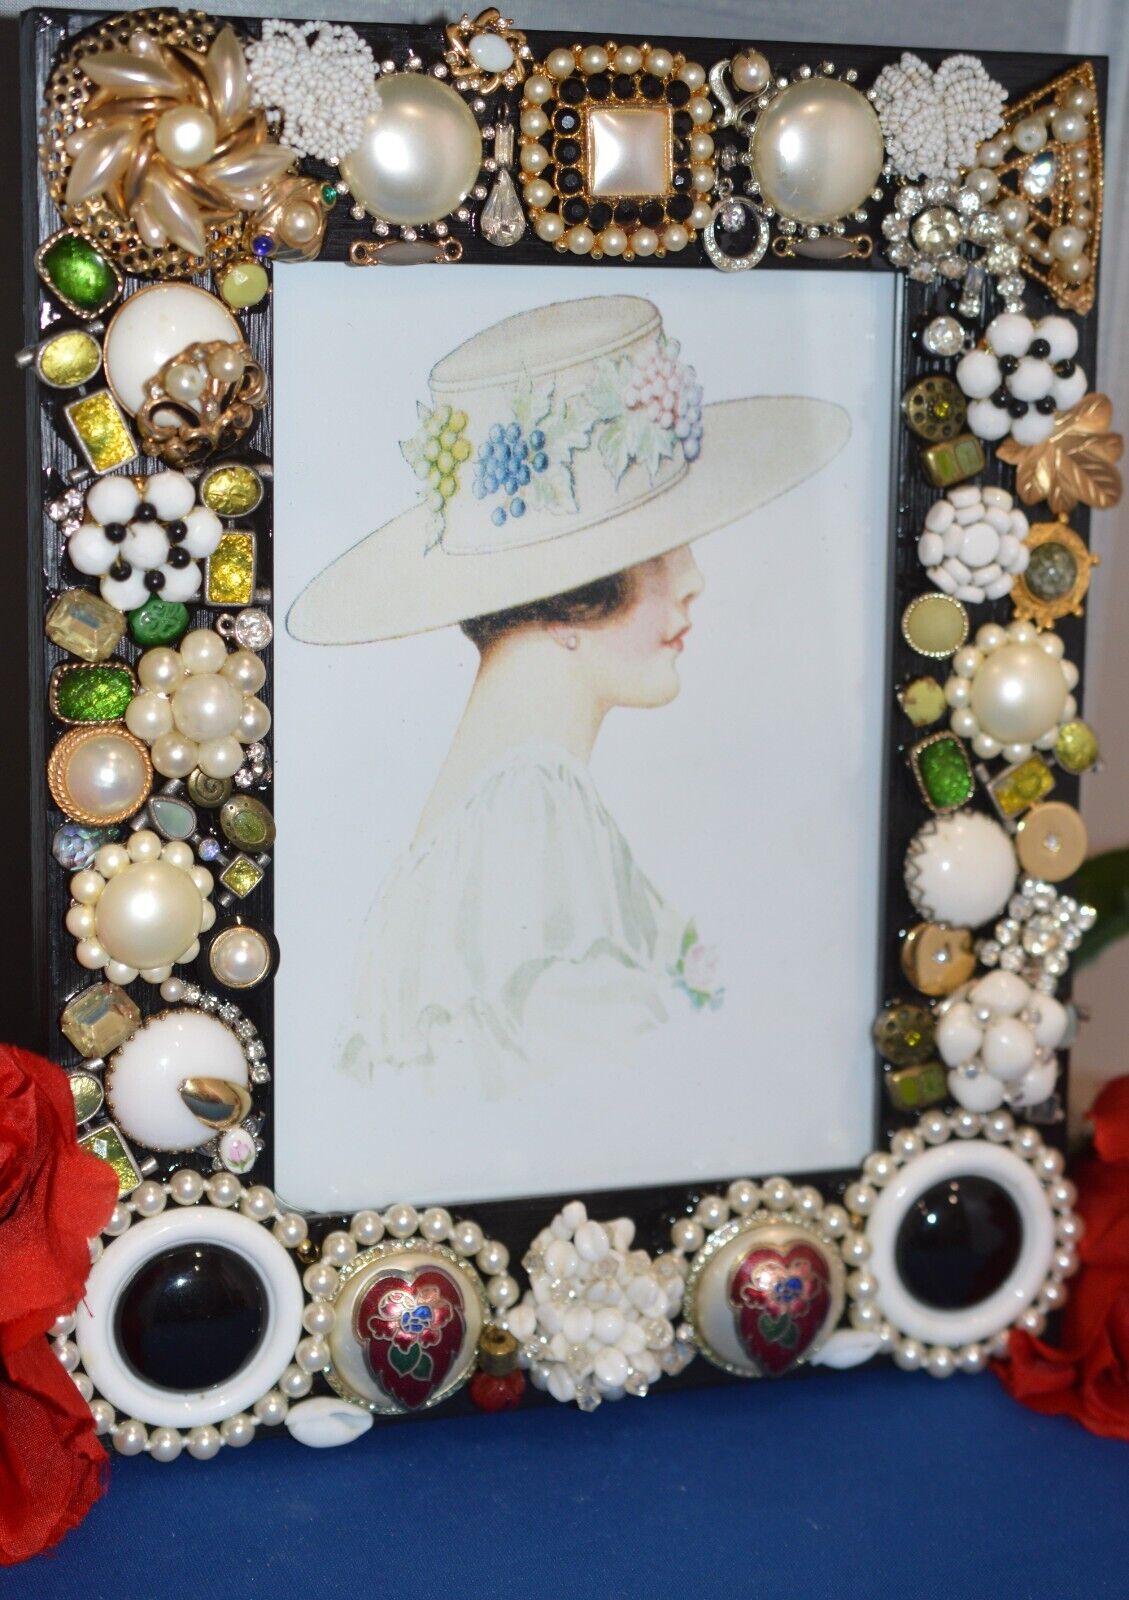 JEWELRY RHINESTONE DECORATED PICTURE FRAME PEARL EMBELLISHED BY ALICE MCCRAY